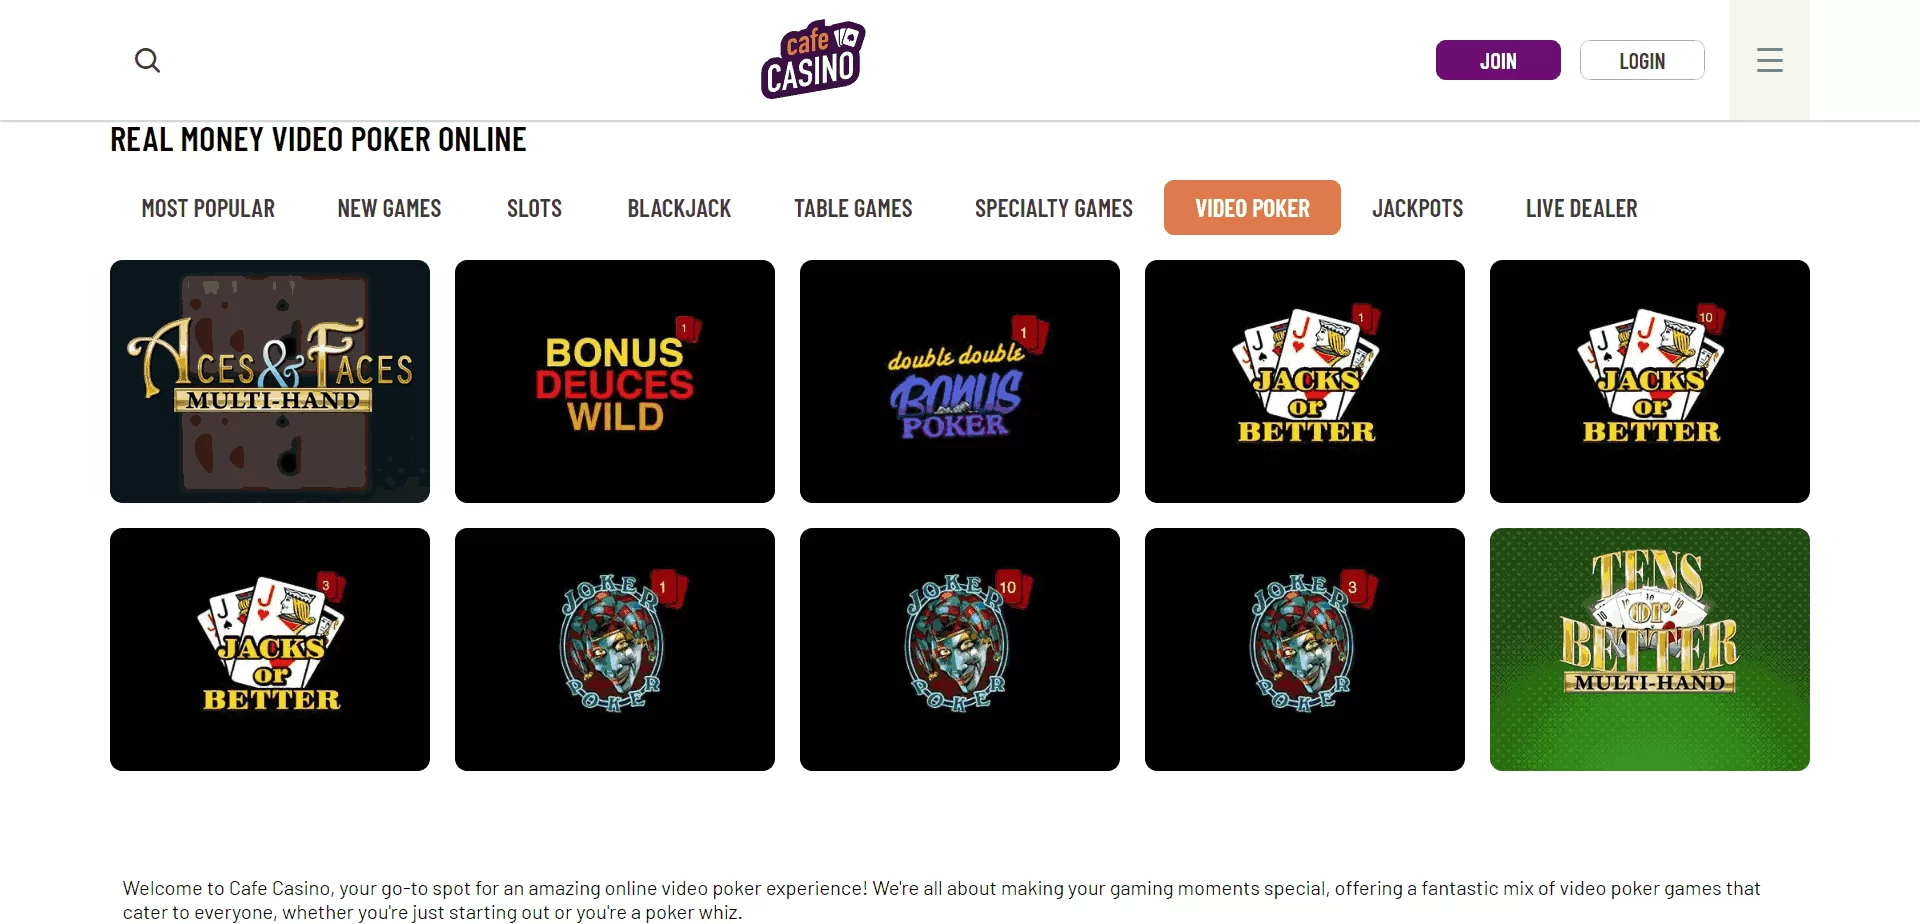 Cafe Casino Weekly Promotions Screen 2